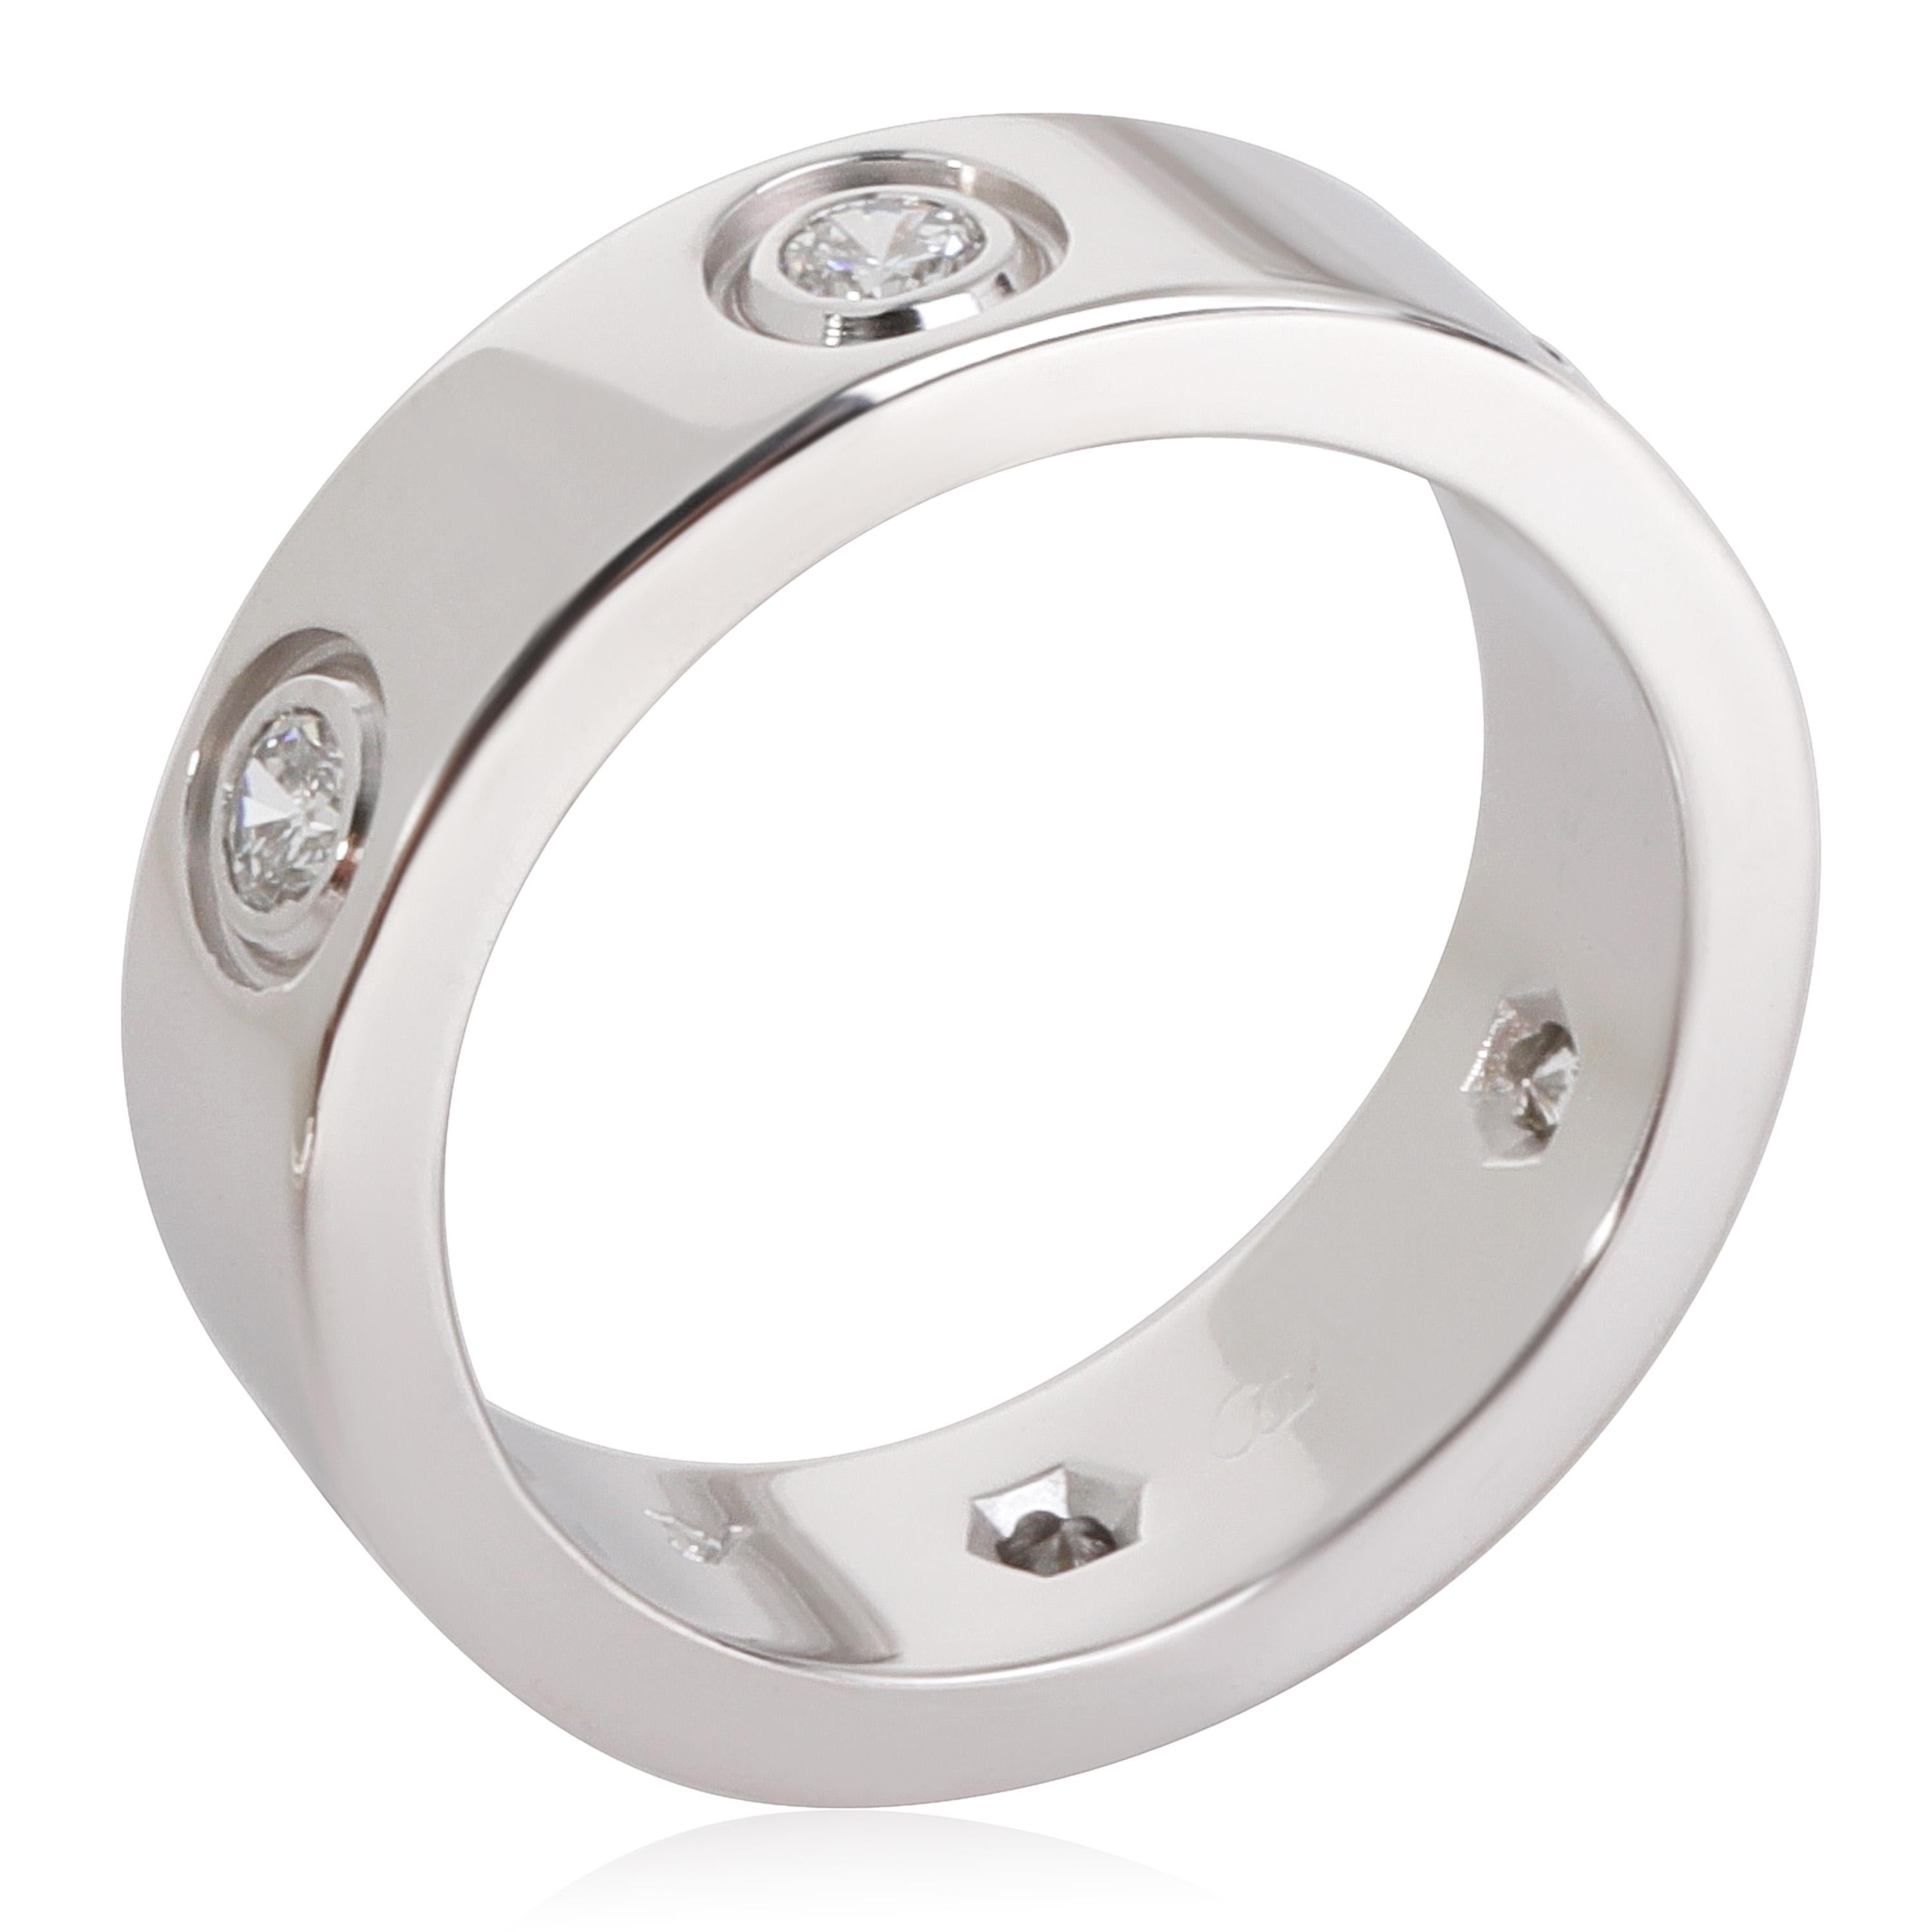 Cartier Love Diamond  Ring in 18k White Gold 0.46 CTW

PRIMARY DETAILS
SKU: 118862
Listing Title: Cartier Love Diamond  Ring in 18k White Gold 0.46 CTW
Condition Description: Retails for 6000 USD. In excellent condition and recently polished. Ring